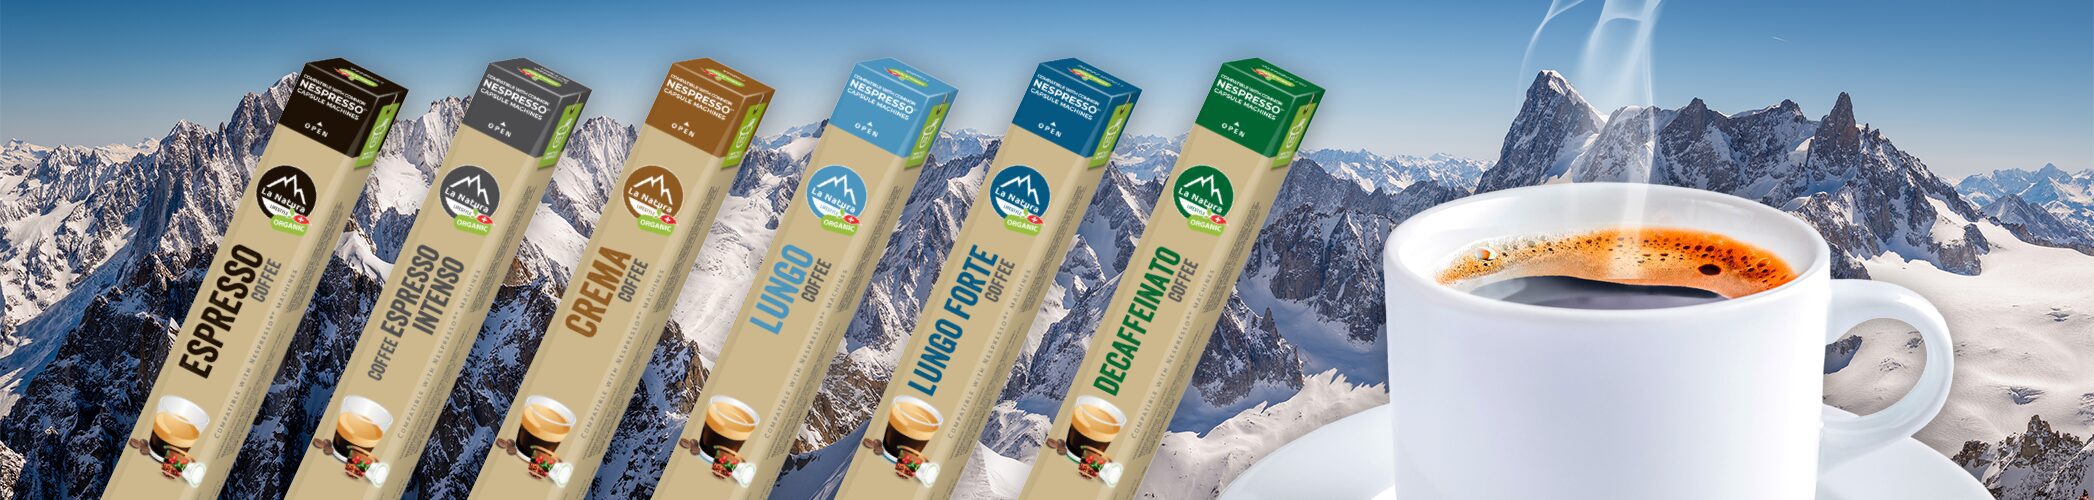 A steaming cup of La Natura coffee with a snowy mountain range in the background. In the foreground are six colorful coffee pod packages labeled (left to right): Espresso, Intenso, Crema, Lungo, Lungo Forte, and Decaffeinato. Celebrate Swiss Coffee Month with every sip!